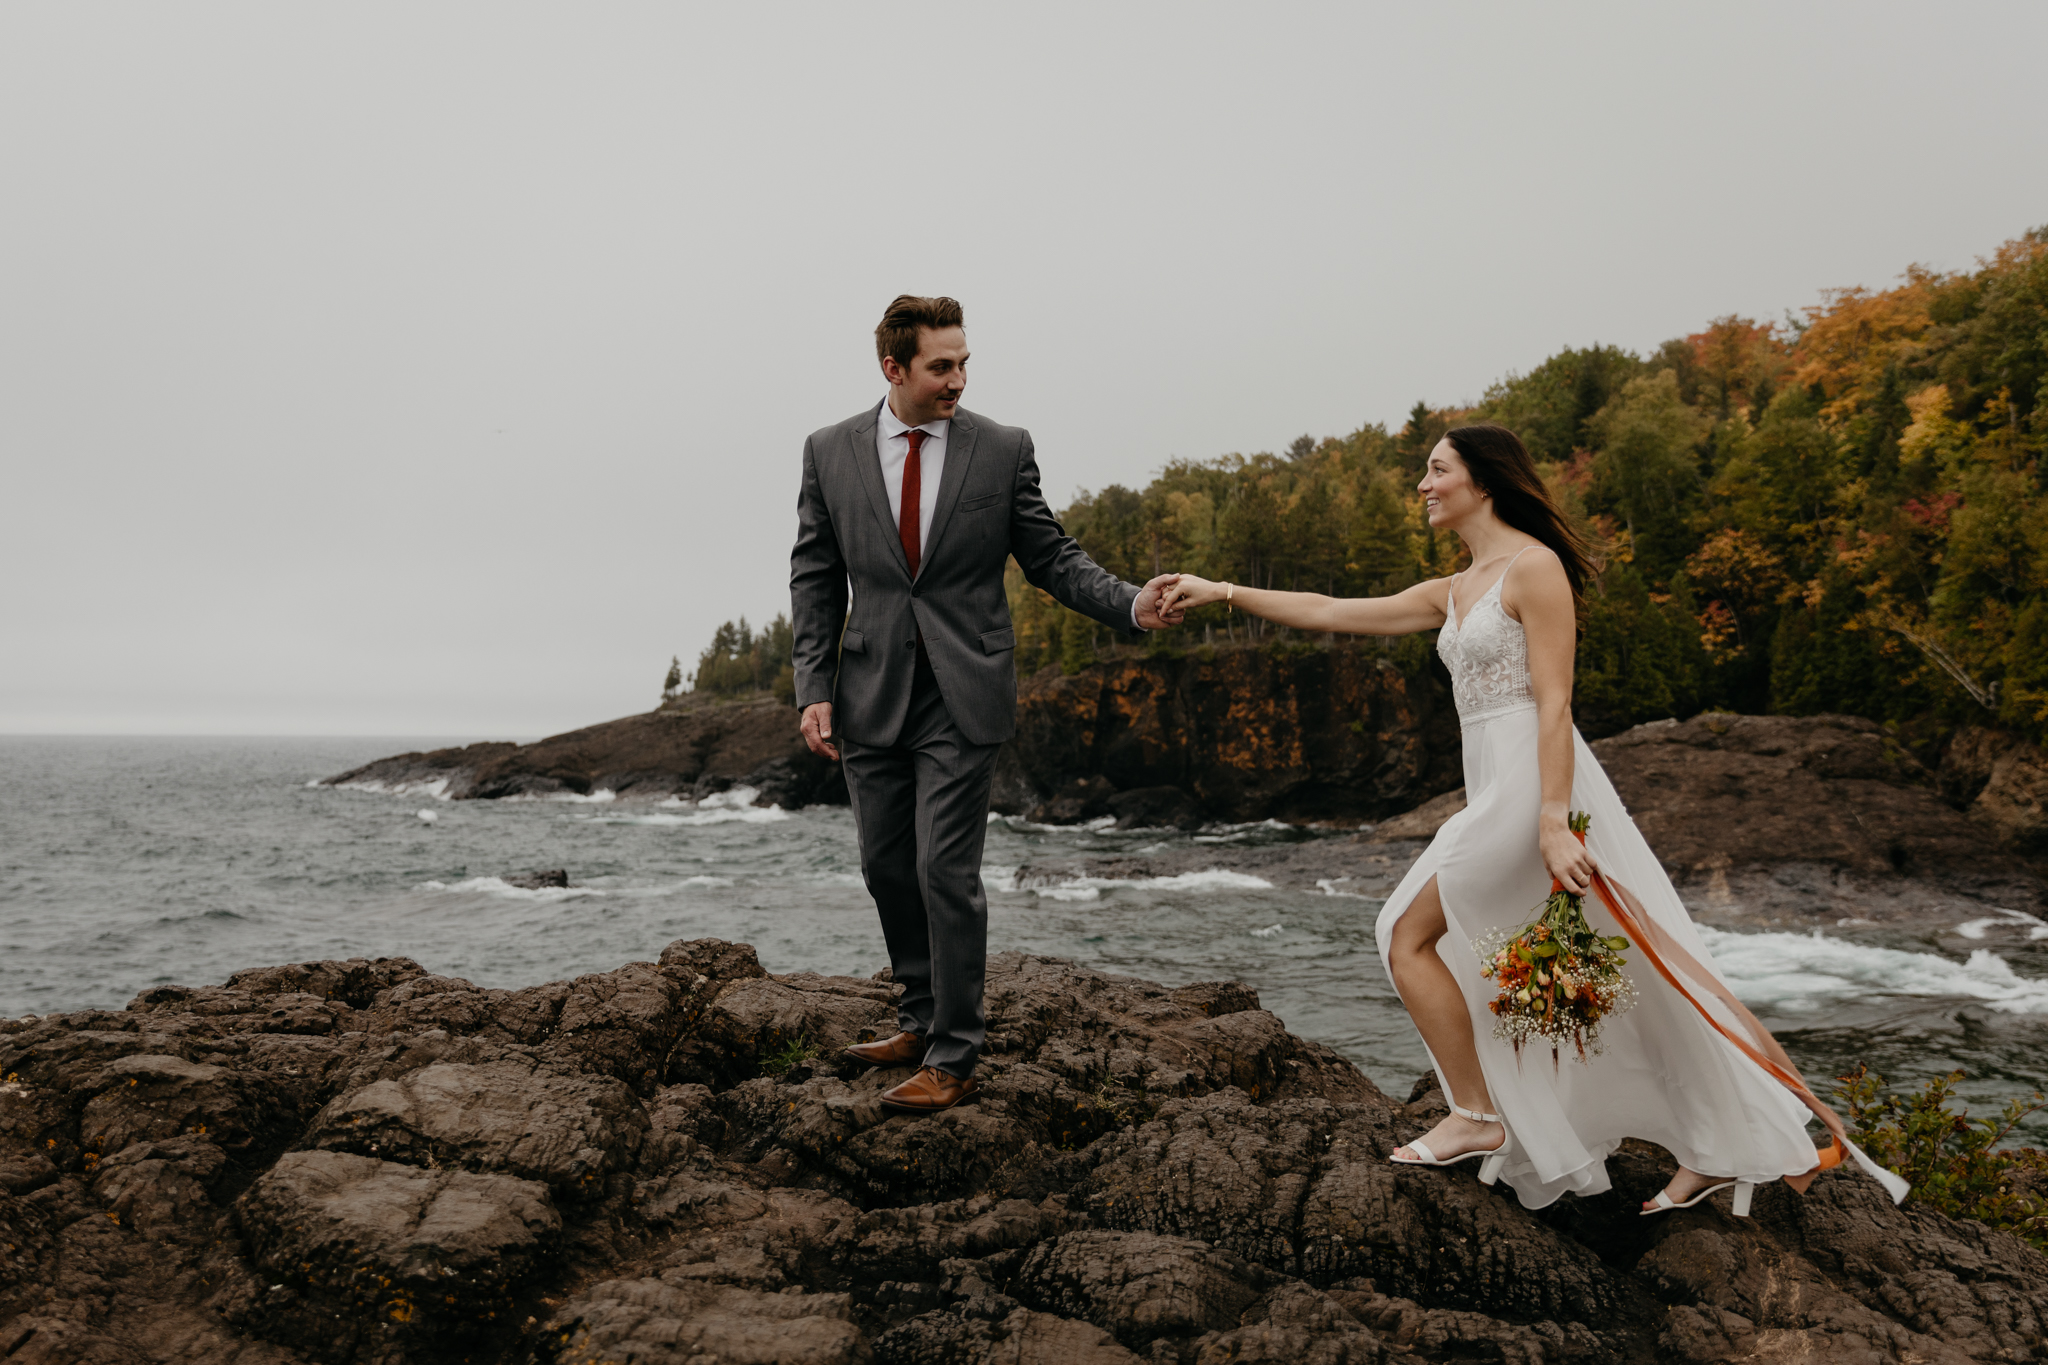 Ope! 7 Best Places to Elope in the Midwest - The Upper Peninsula, Michigan Elopement